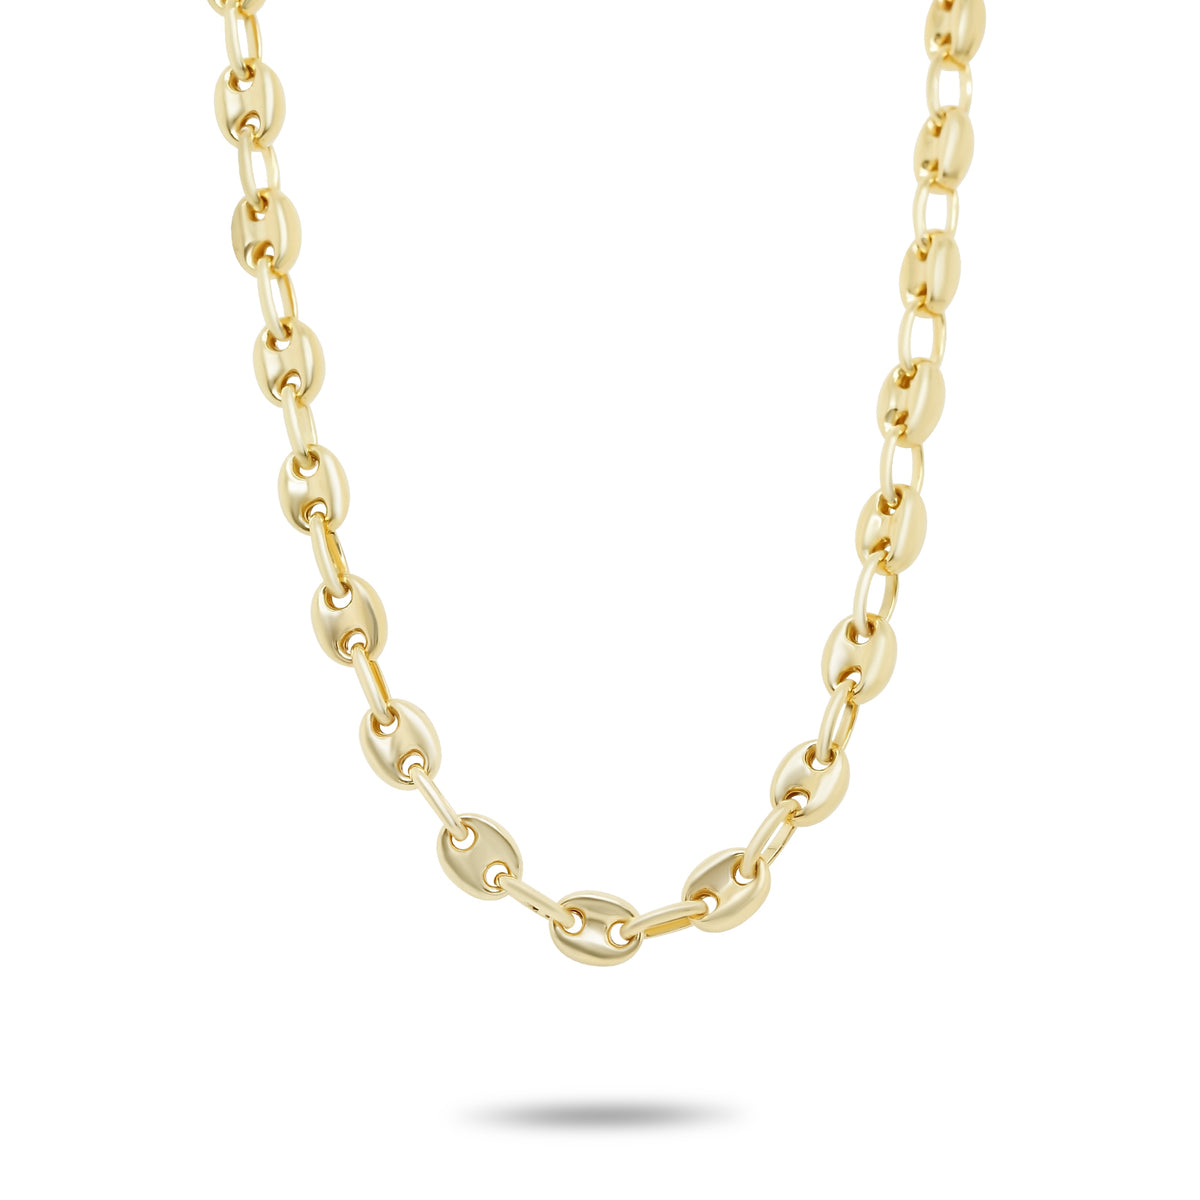 20 inch 14k yellow gold mariner chain necklace